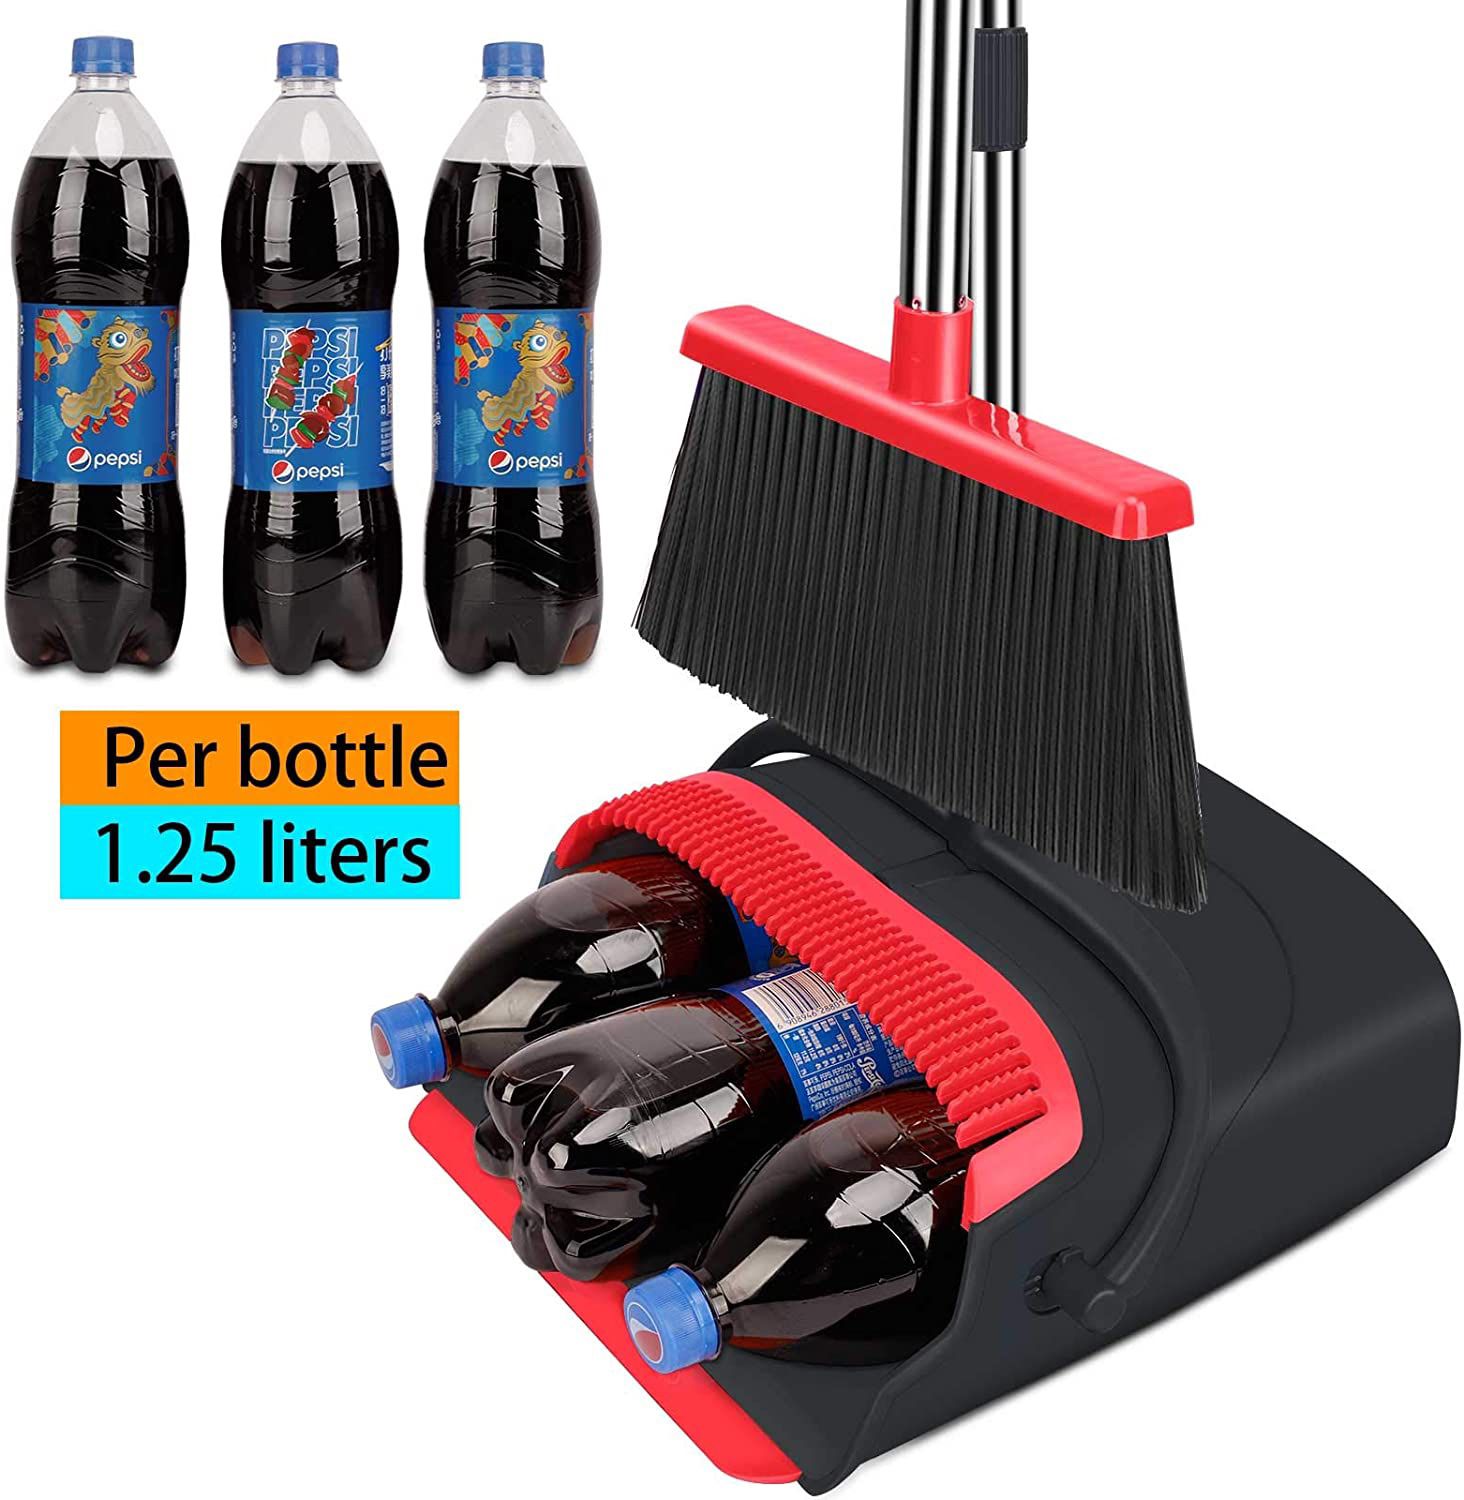 Broom and Dustpan set Large Size Dust pan and Stiff with 55.9 inch Long Handle, Stainless Steel Extra Long Handle Broom Is Easy To Clean And Assemble,